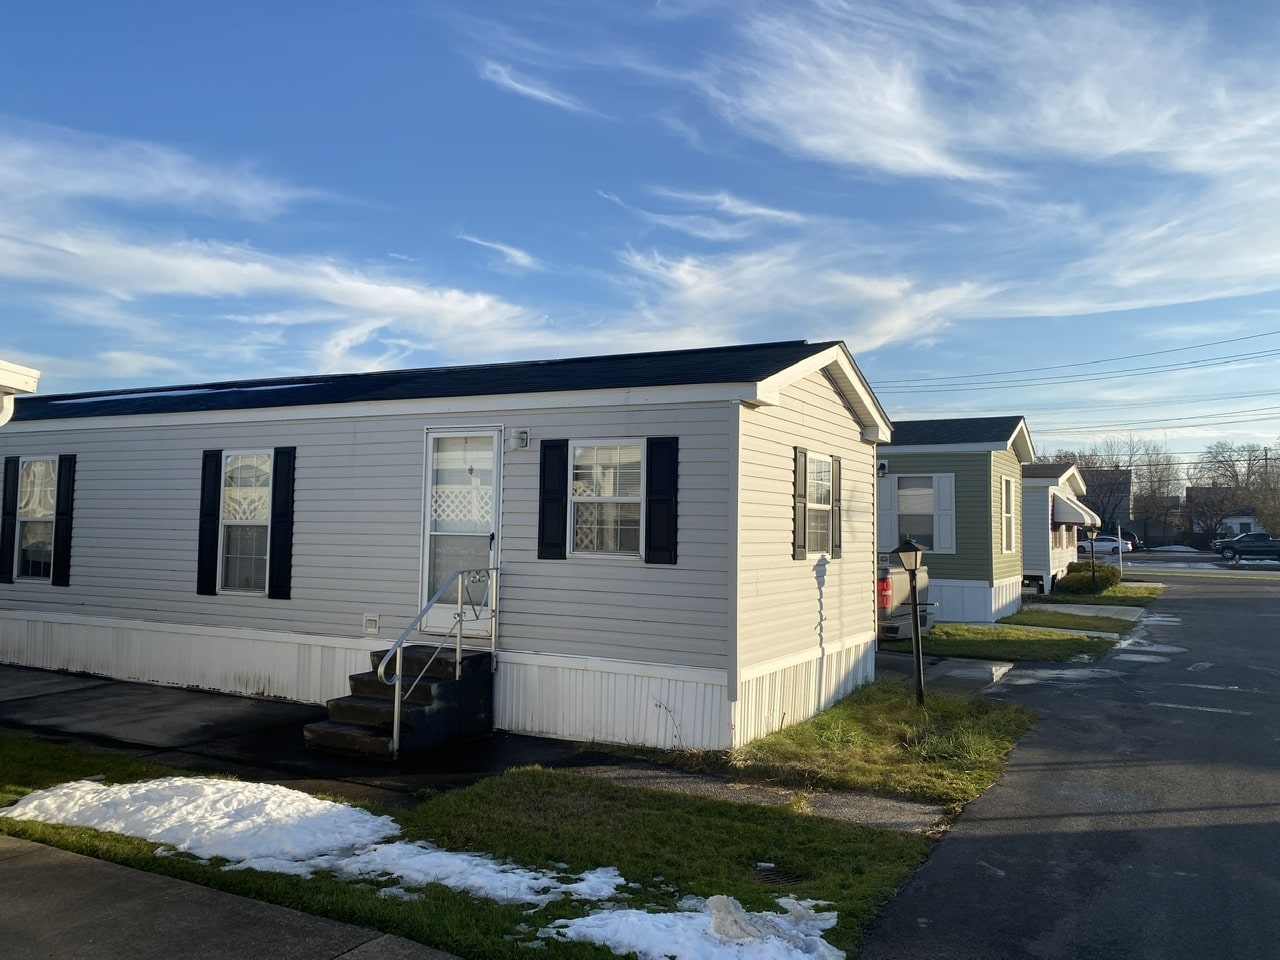 A gray singlewide mobile home with black roof